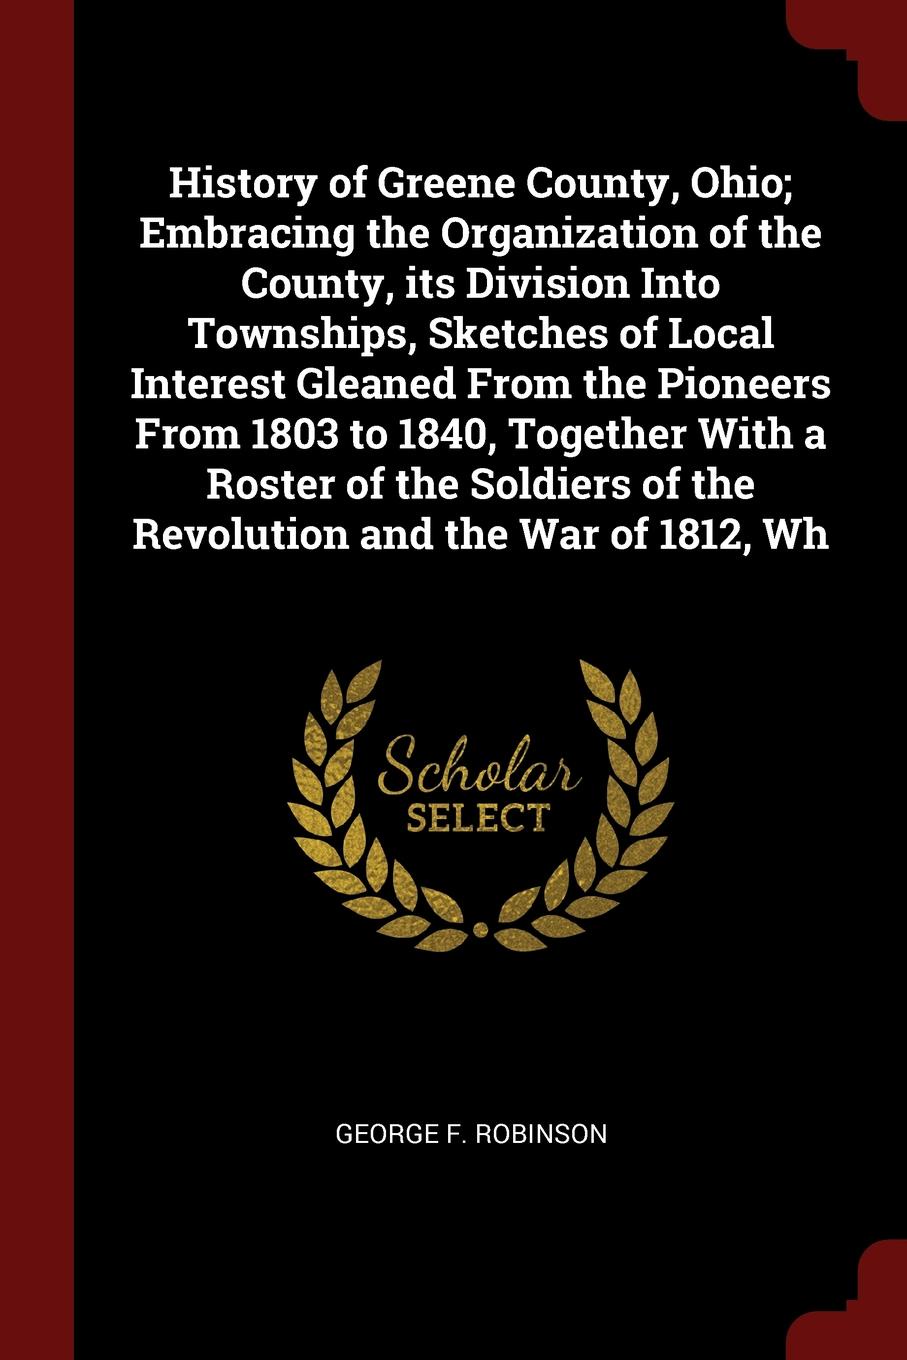 History of Greene County, Ohio; Embracing the Organization of the County, its Division Into Townships, Sketches of Local Interest Gleaned From the Pioneers From 1803 to 1840, Together With a Roster of the Soldiers of the Revolution and the War of ...